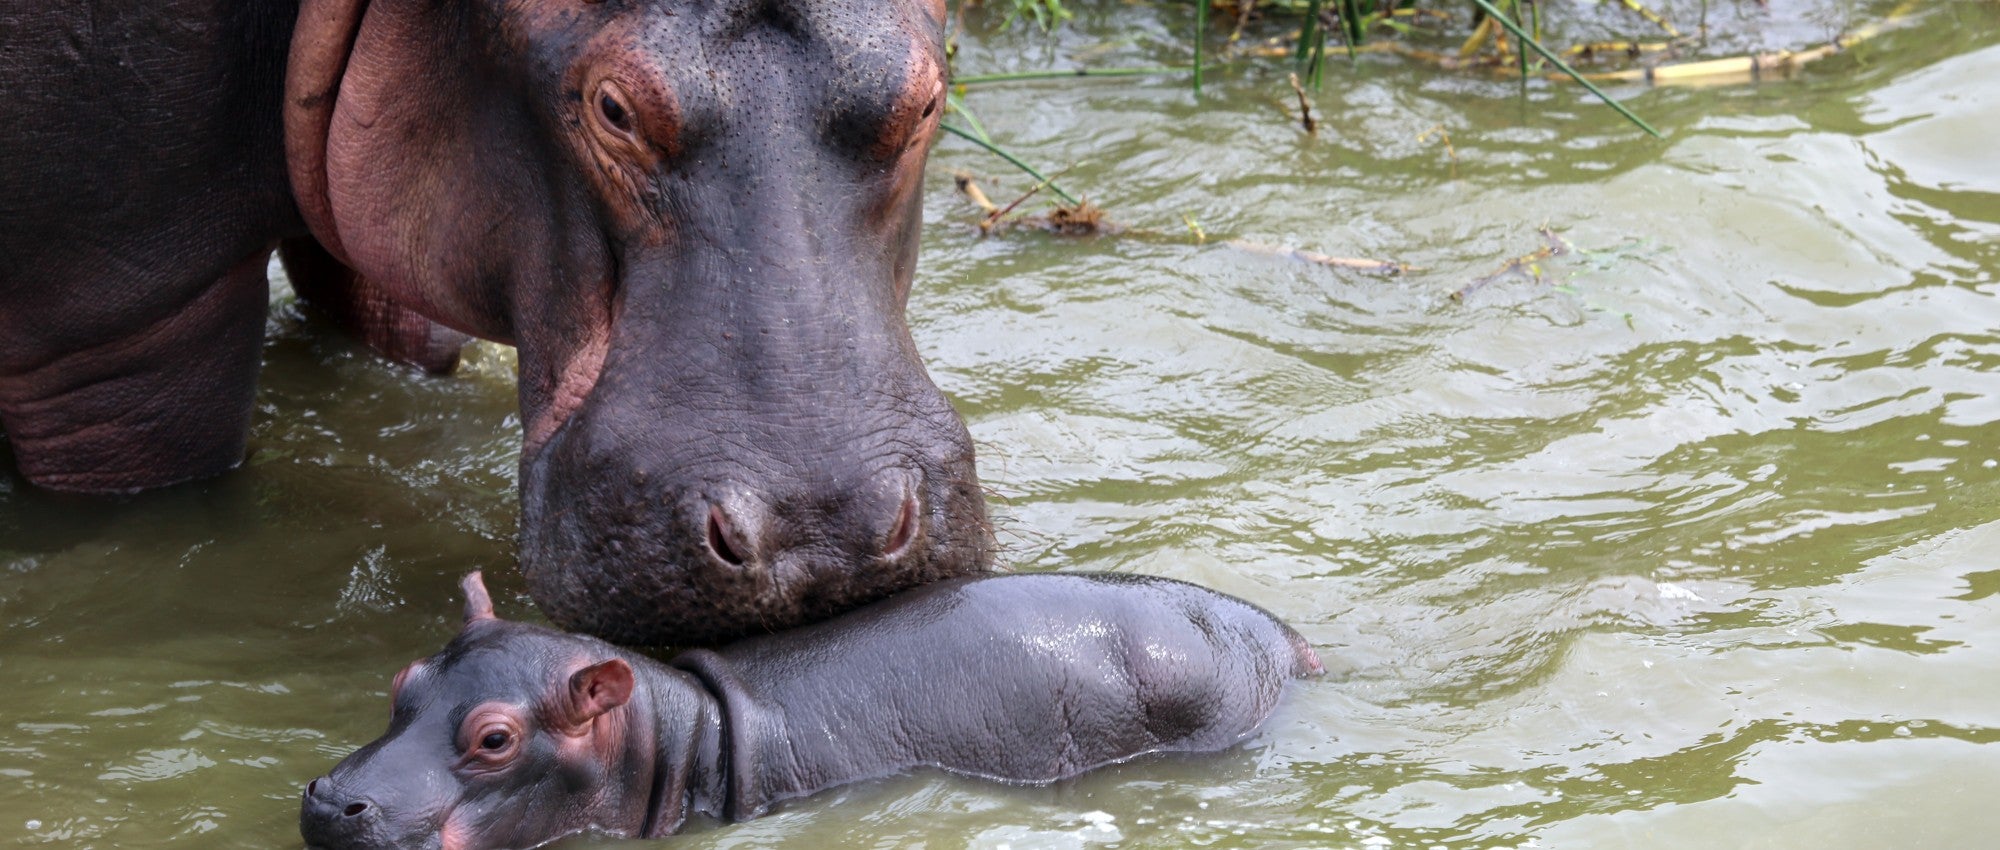 Leopards, sharks and glass frogs win new protections, while hippos face tragic losses